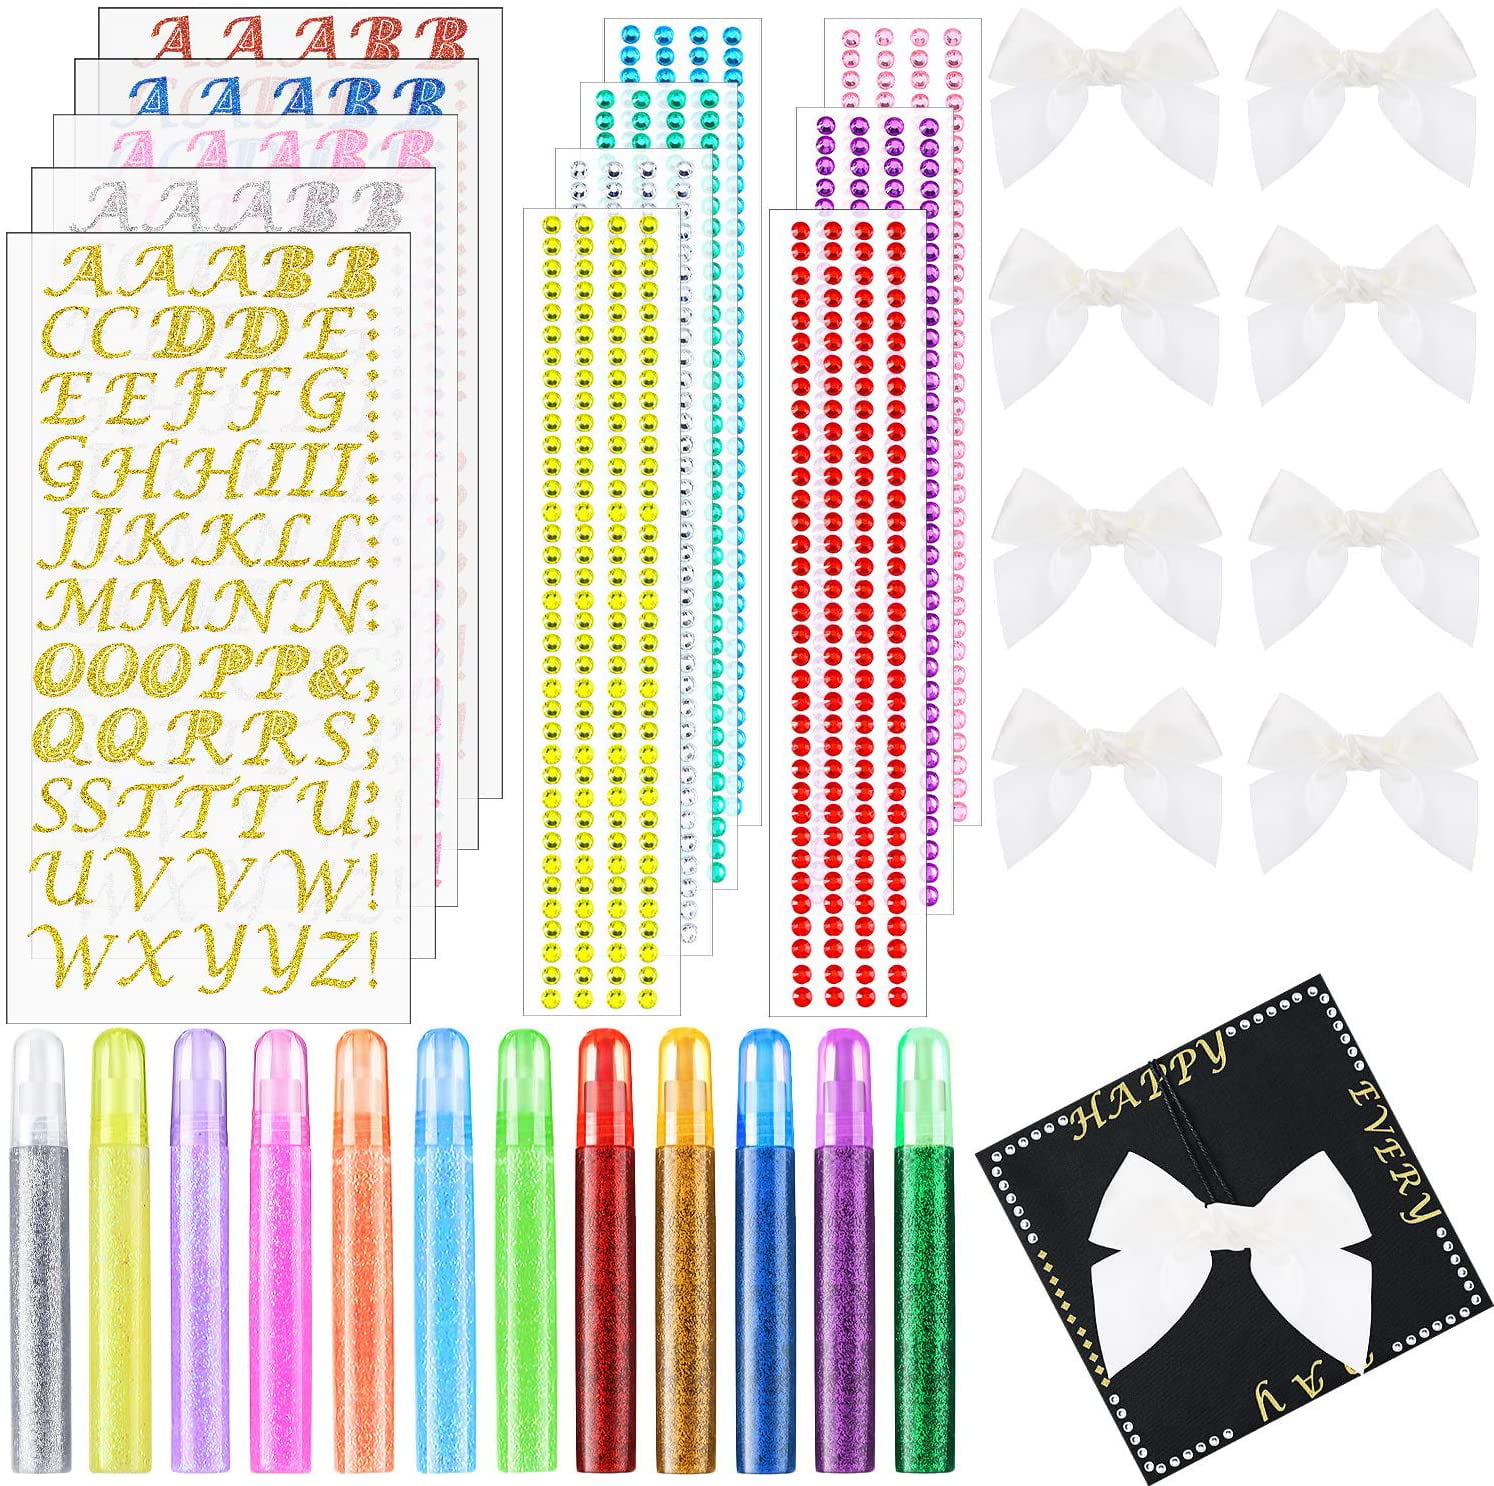 31 Pieces Graduation Cap Decoration Kit Include Rhinestone Stickers Glitter Alphabet Letter Stickers Glitter Glue Pens and Bowknot Ornament for Graduation Party Decoration 